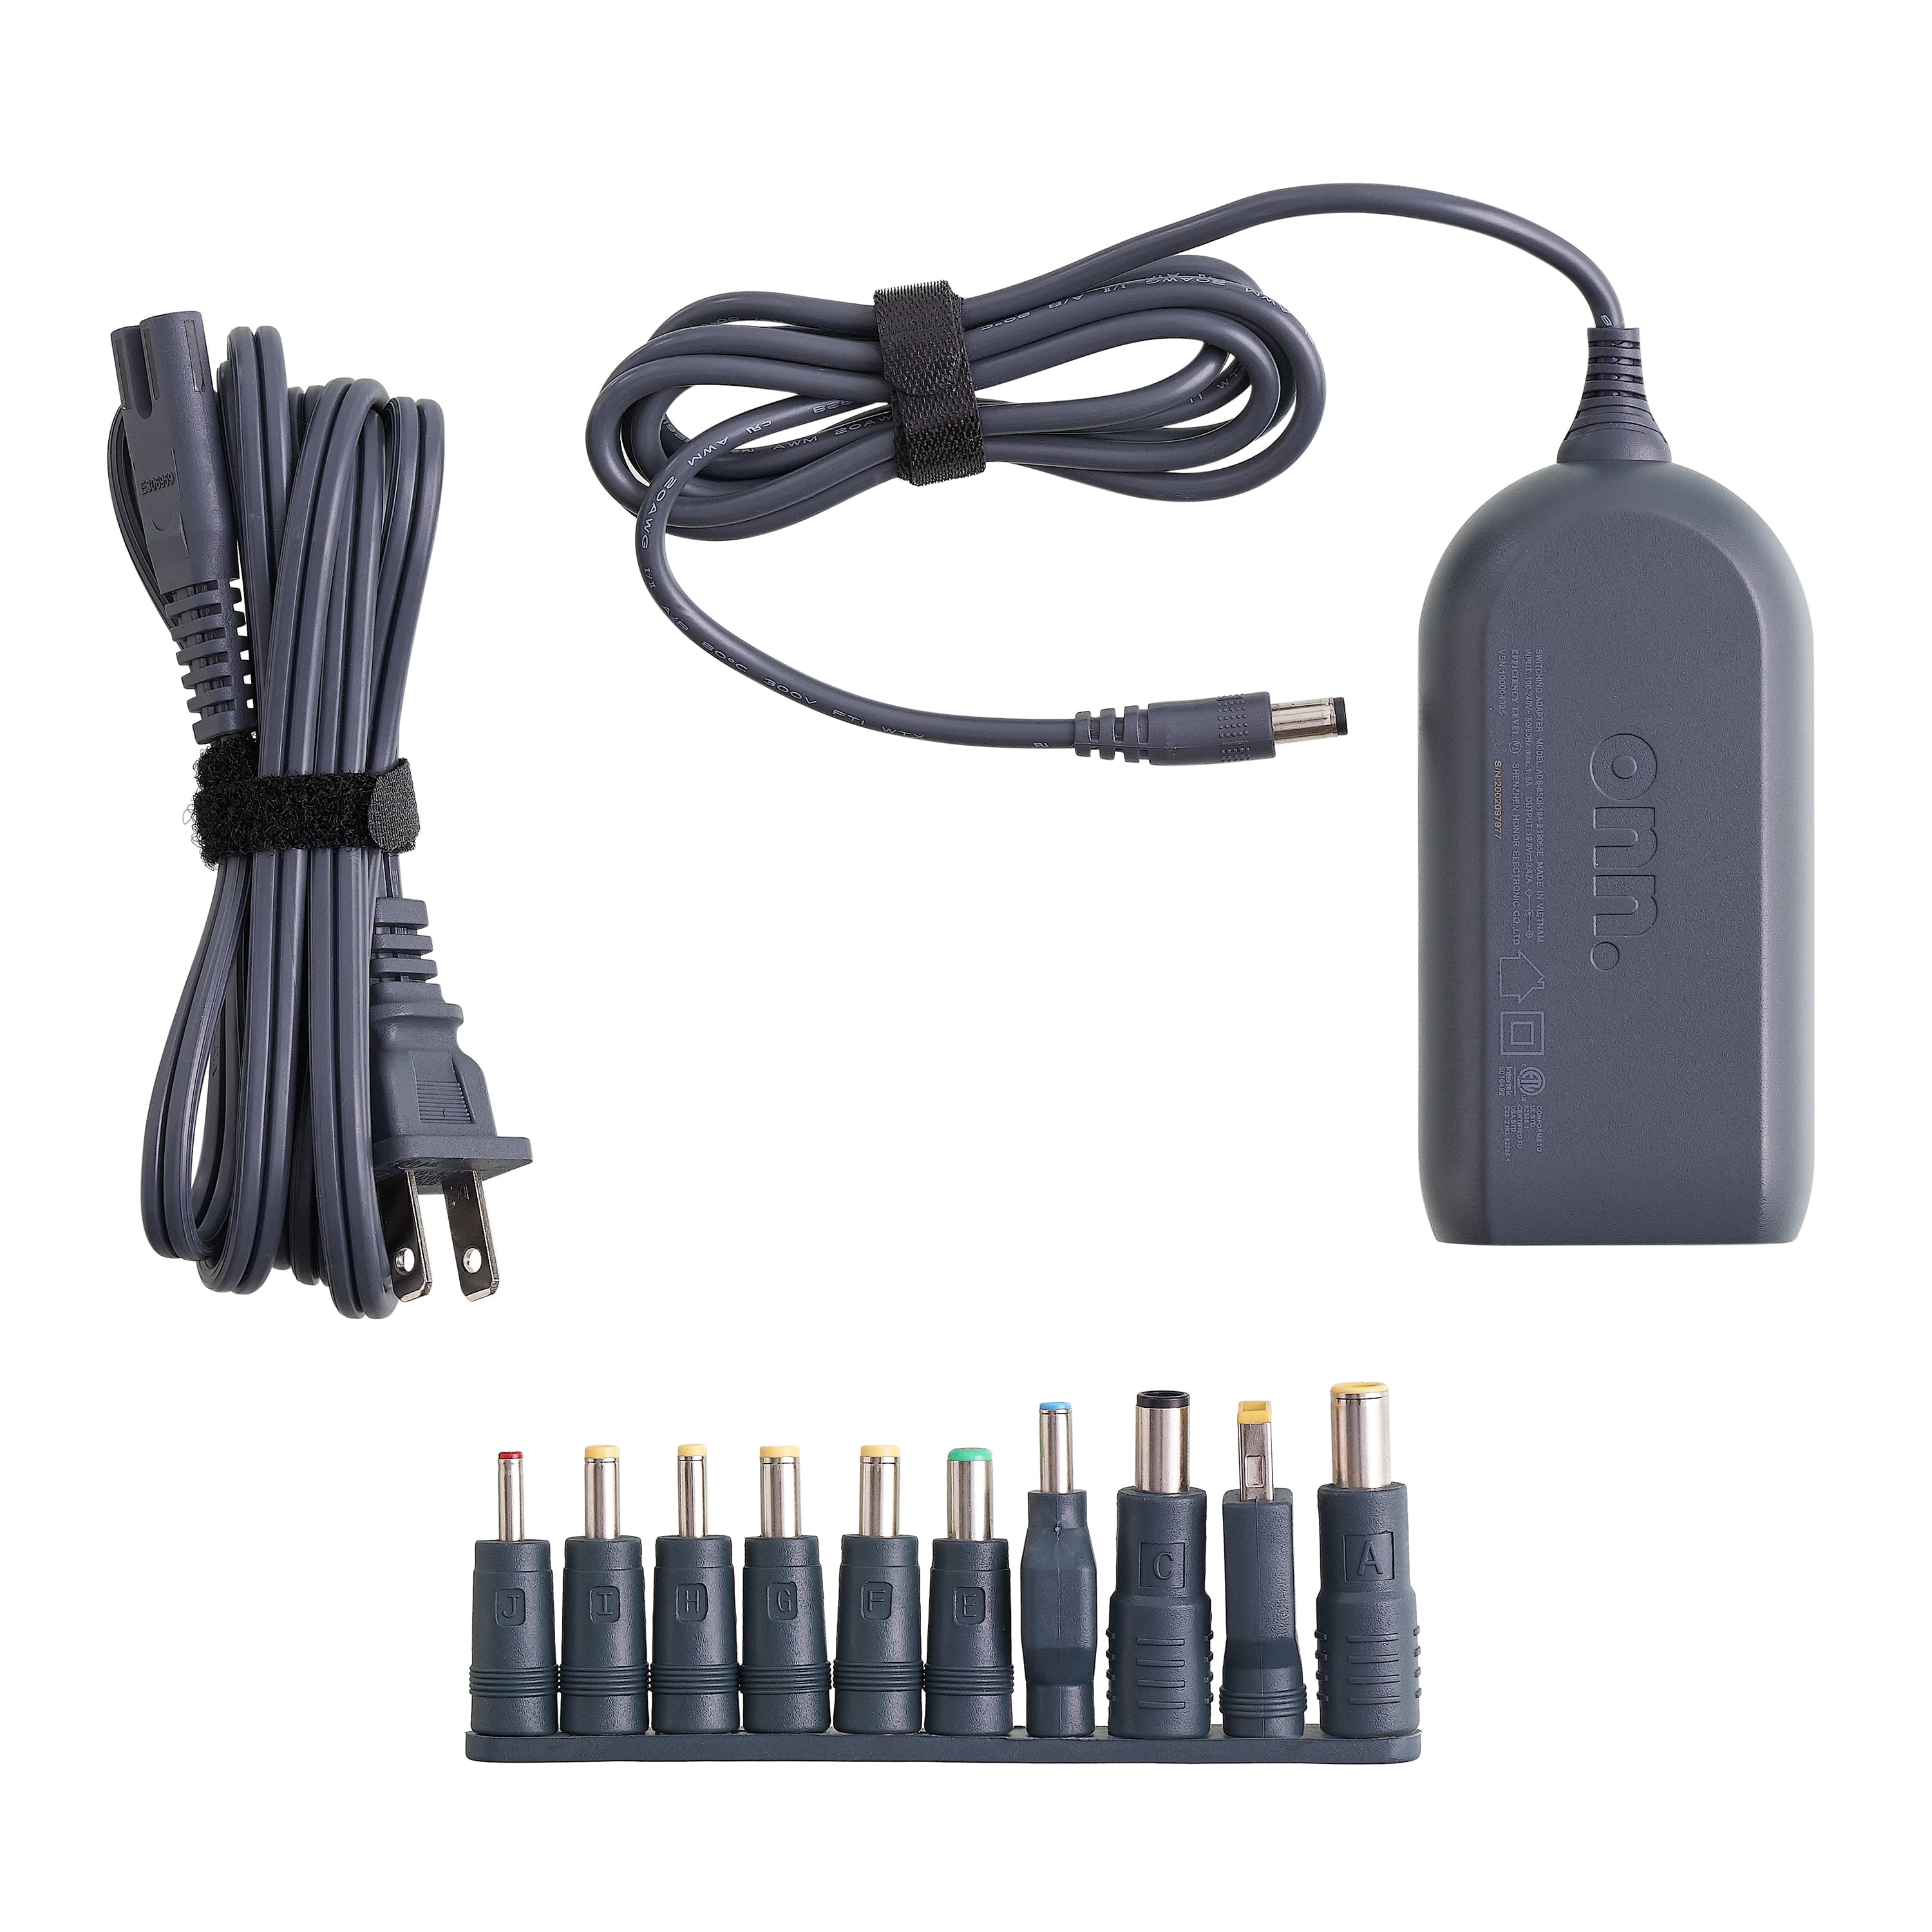 onn. 65W Laptop Charger w/10 Interchangeable Tips, 10 ft Power Cord for HP, Dell, Lenovo Laptops, Grey